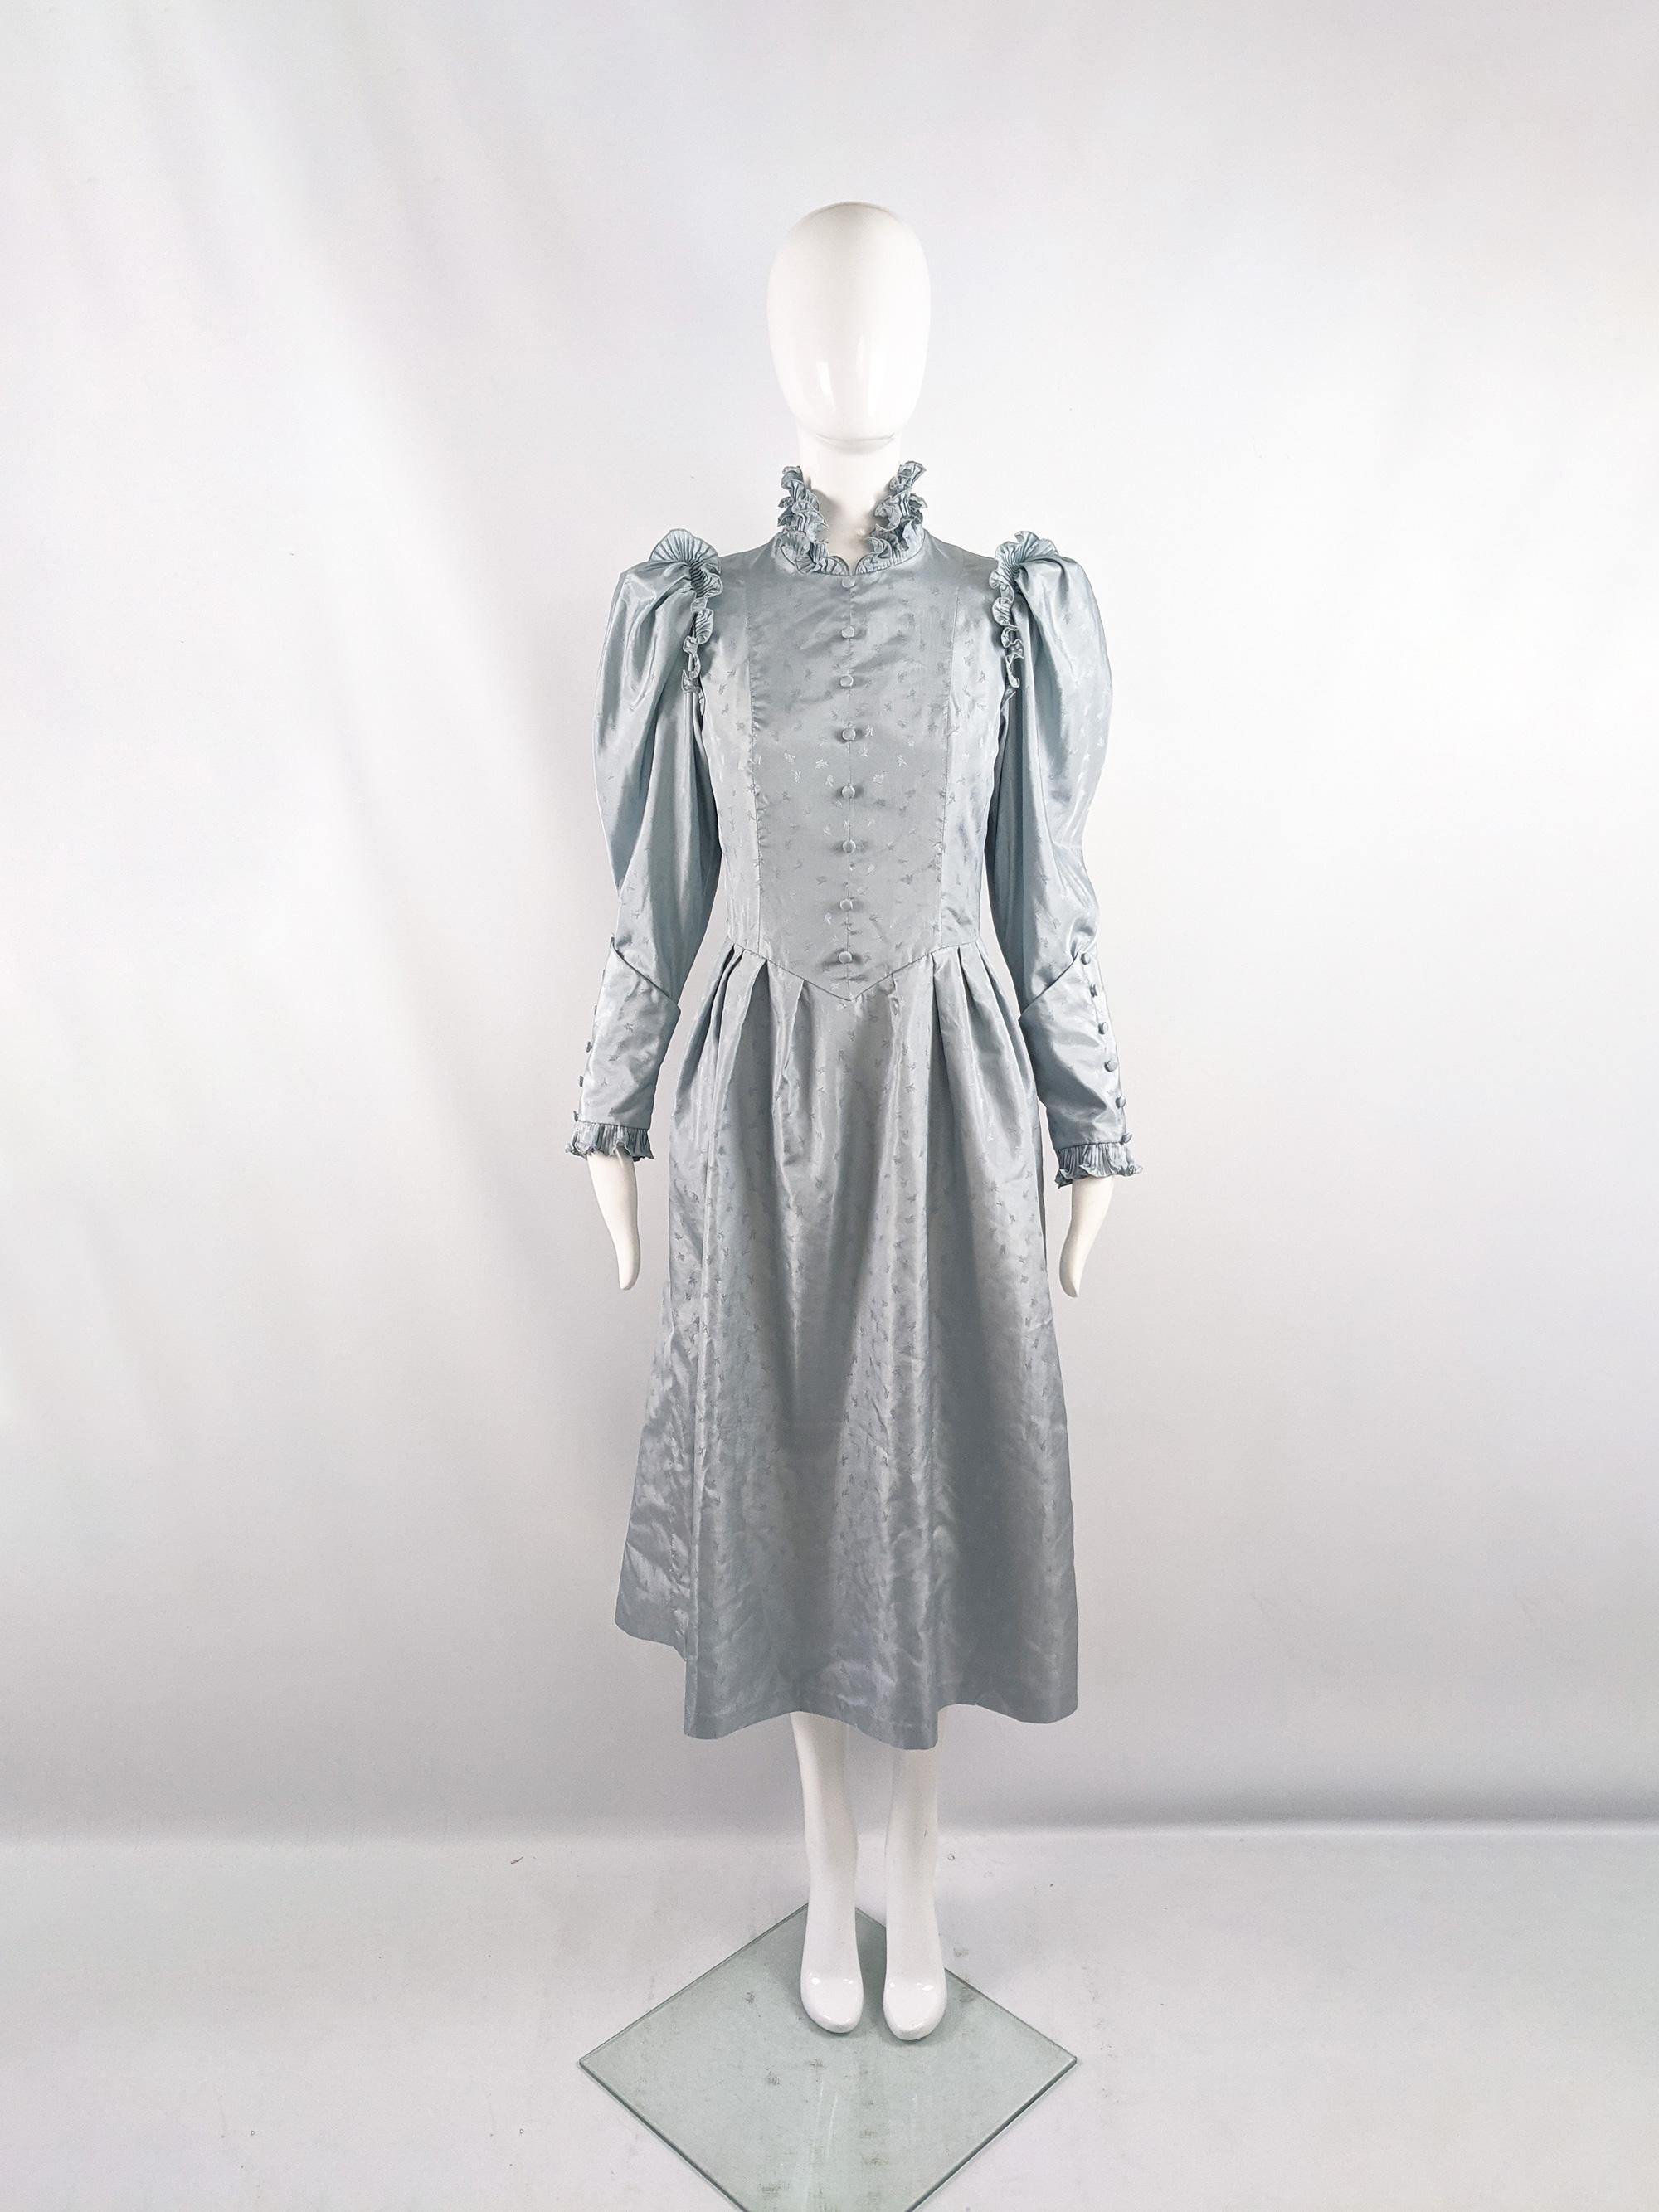 A stunning and rare vintage womens mid length dress from the 70s by iconic British boutique designer, Annie Gough. In a duck egg blue taffeta with a jacquard weave throughout. It has a pleated, ruffle high neck collar, leg o mutton style sleeves